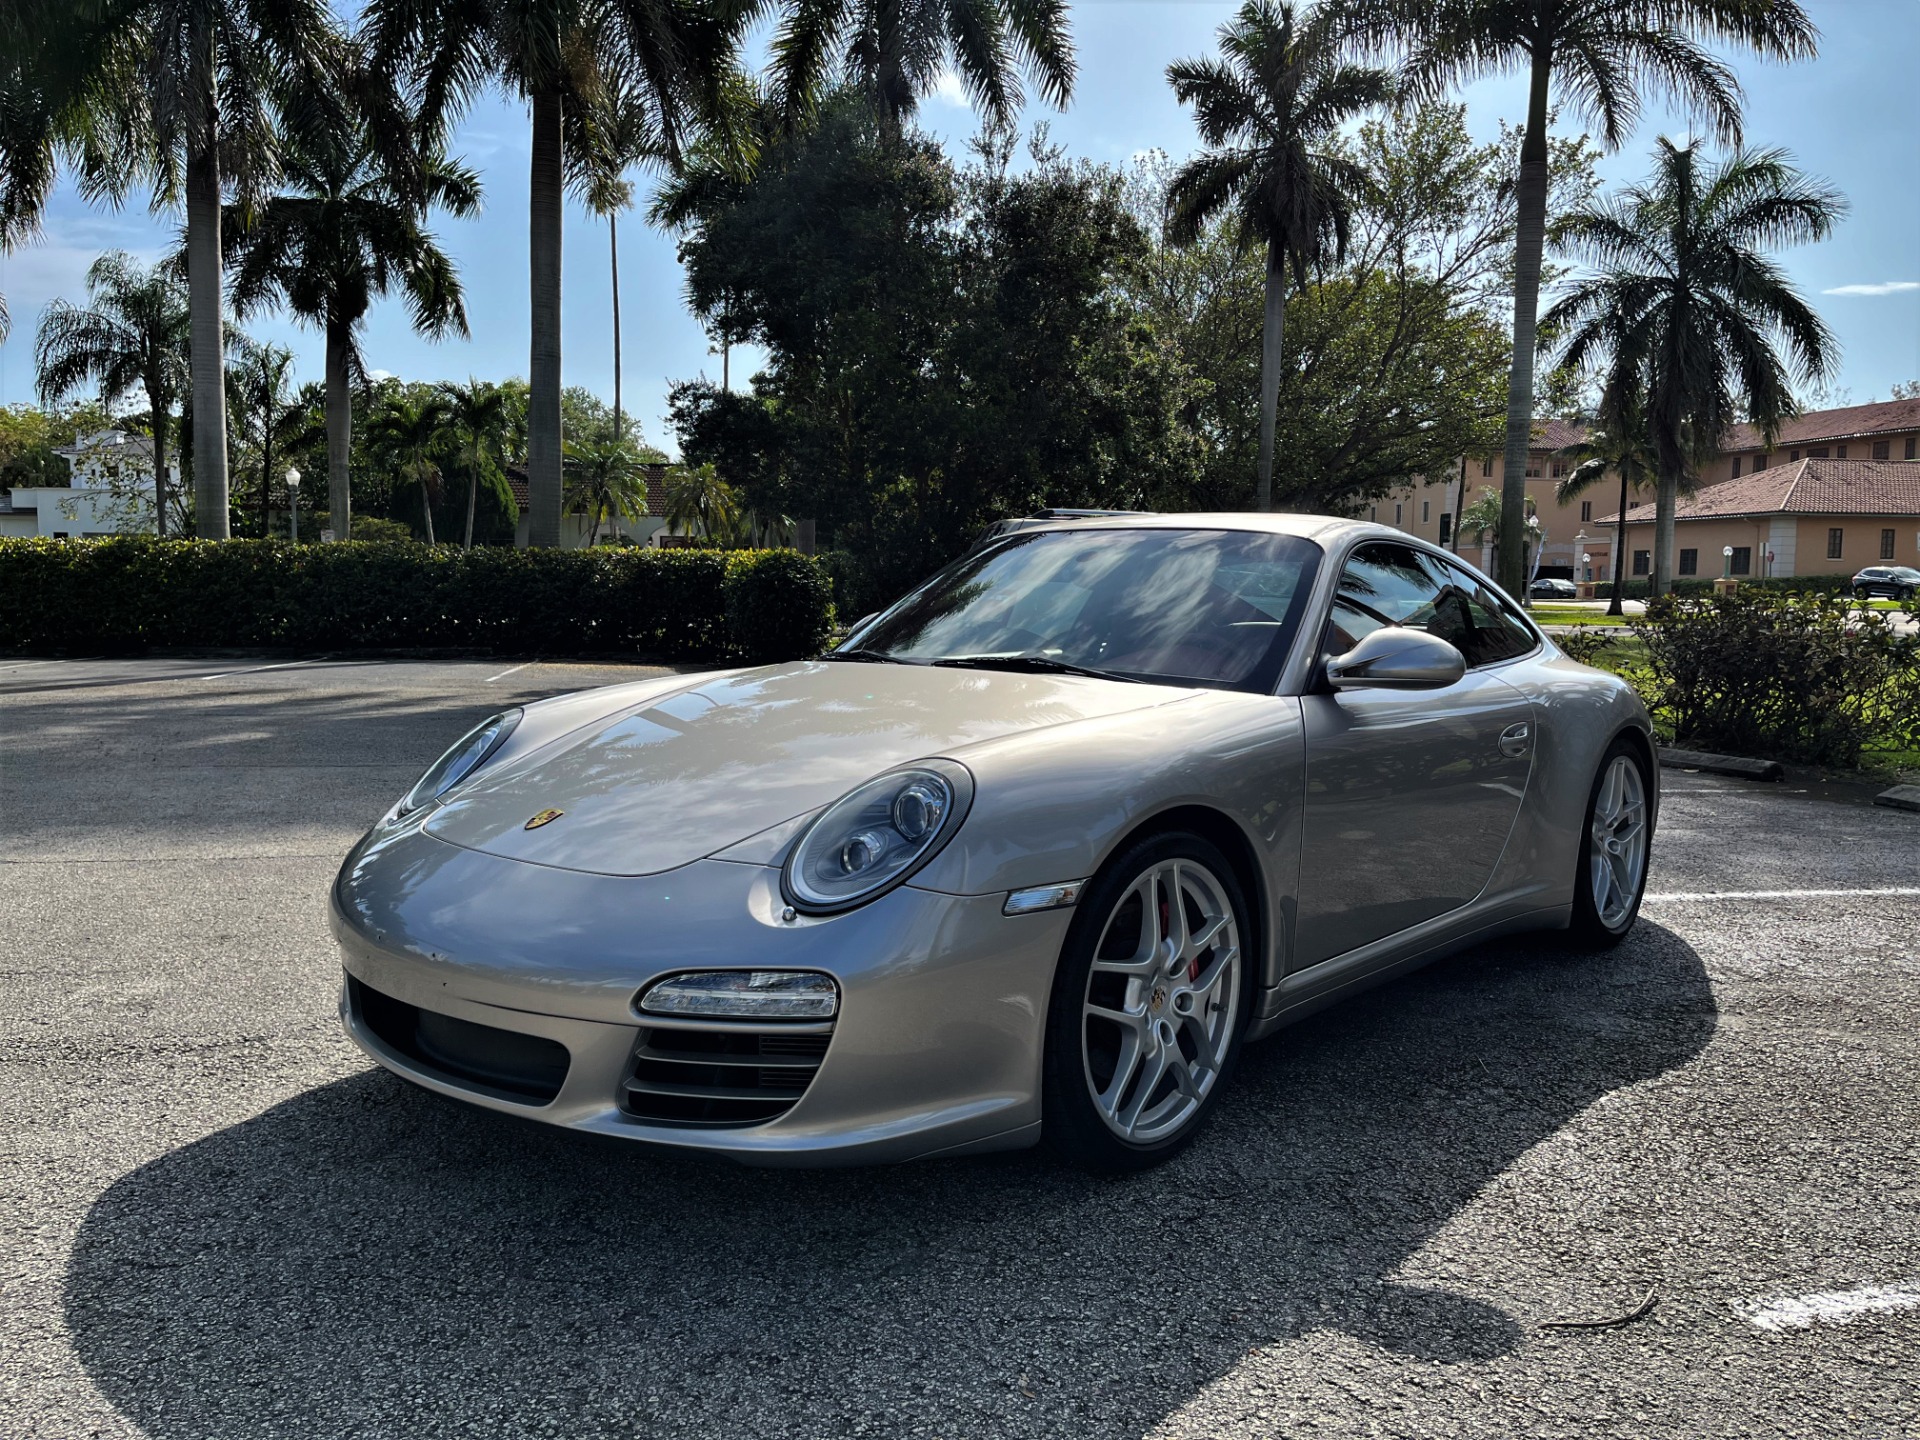 Used 2011 Porsche 911 Carrera 4S for sale Sold at The Gables Sports Cars in Miami FL 33146 3